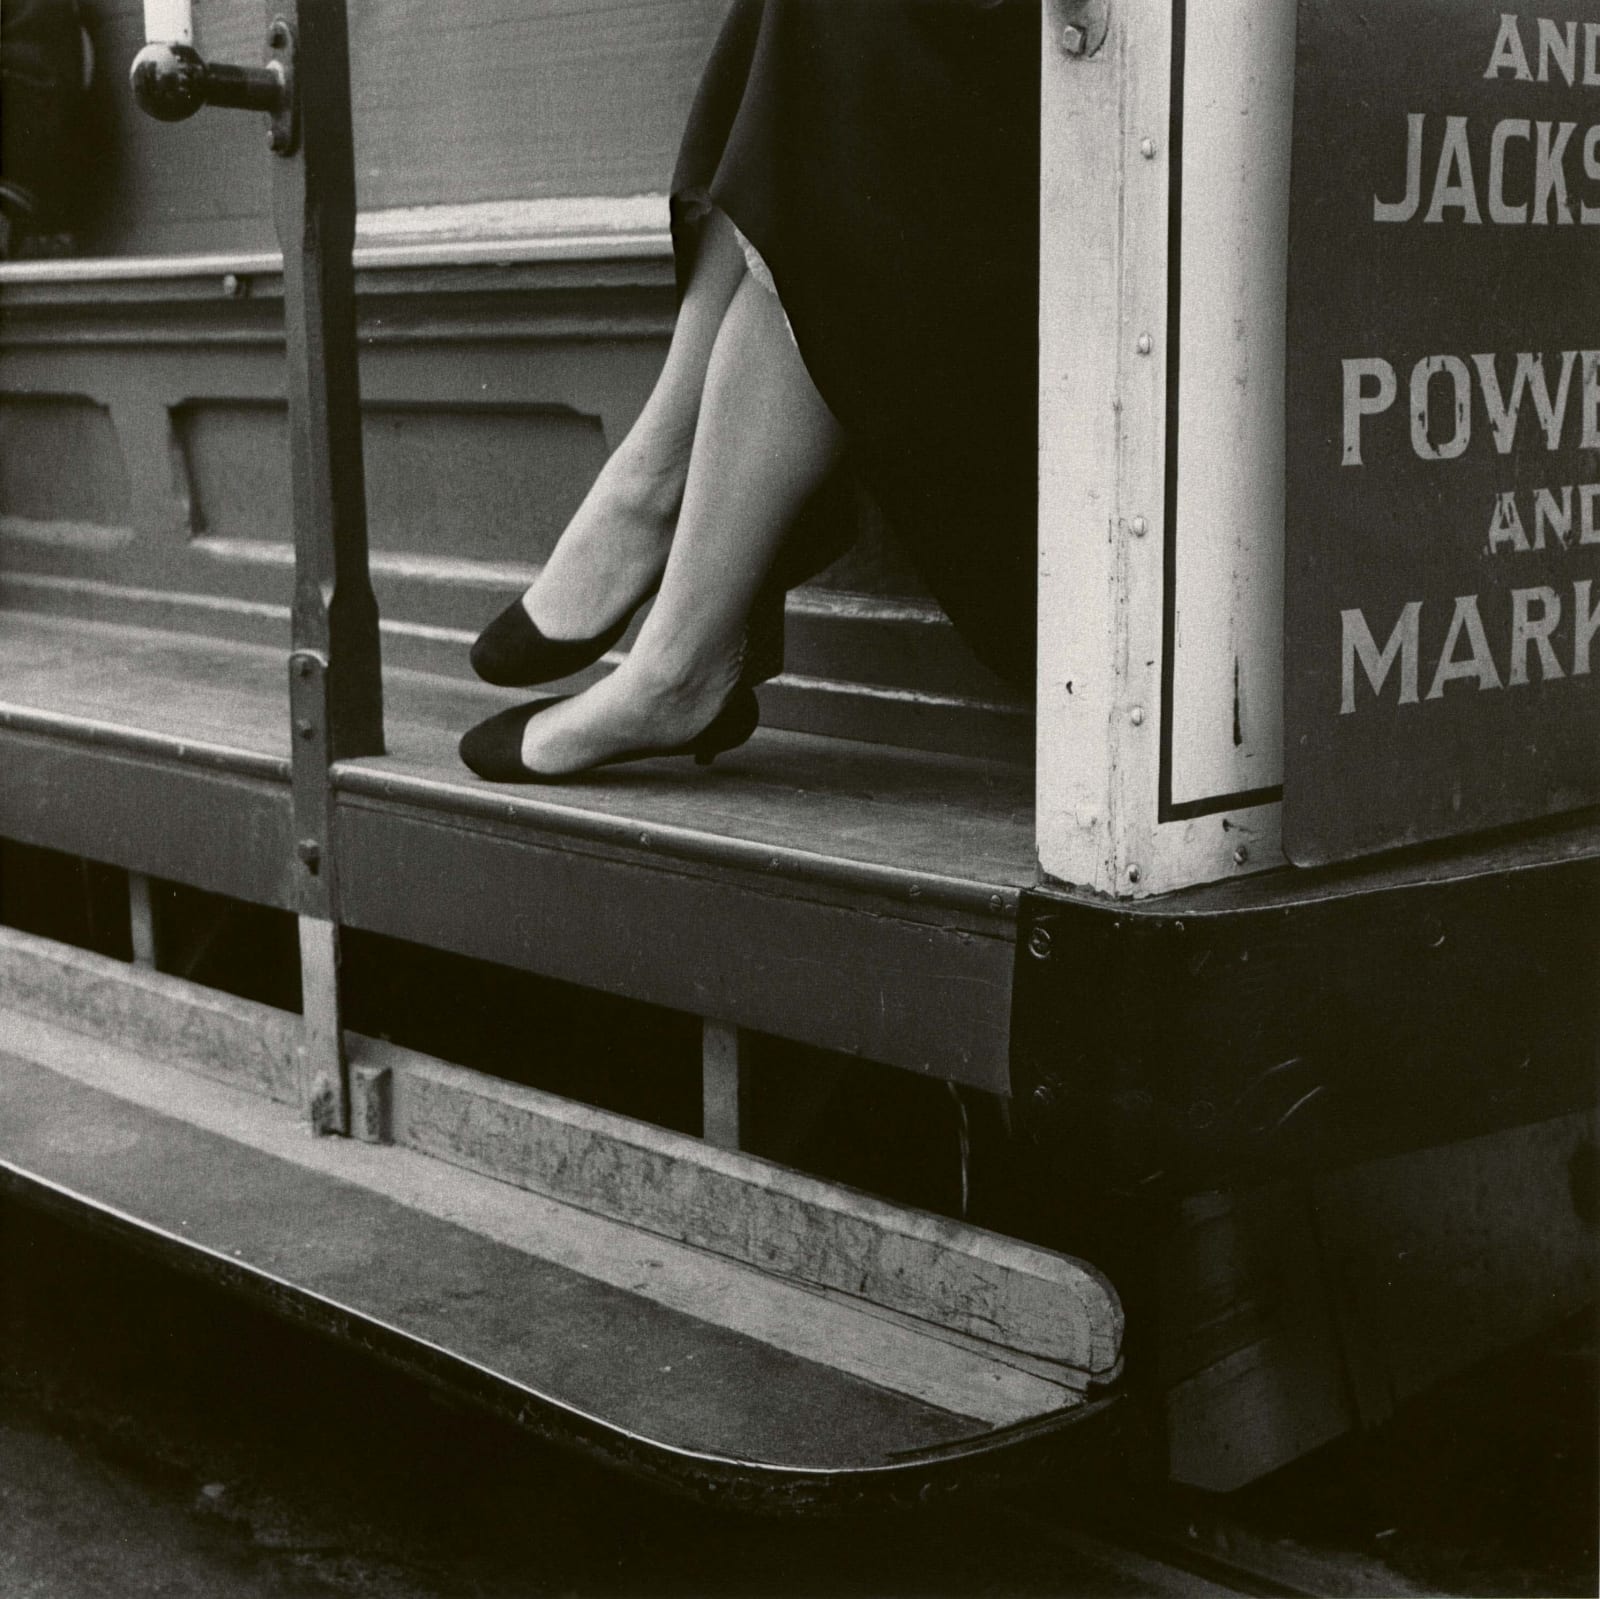 Dorothea Lange Cable Car San Francisco close up cropped image of woman's legs crossed while seated on cable car